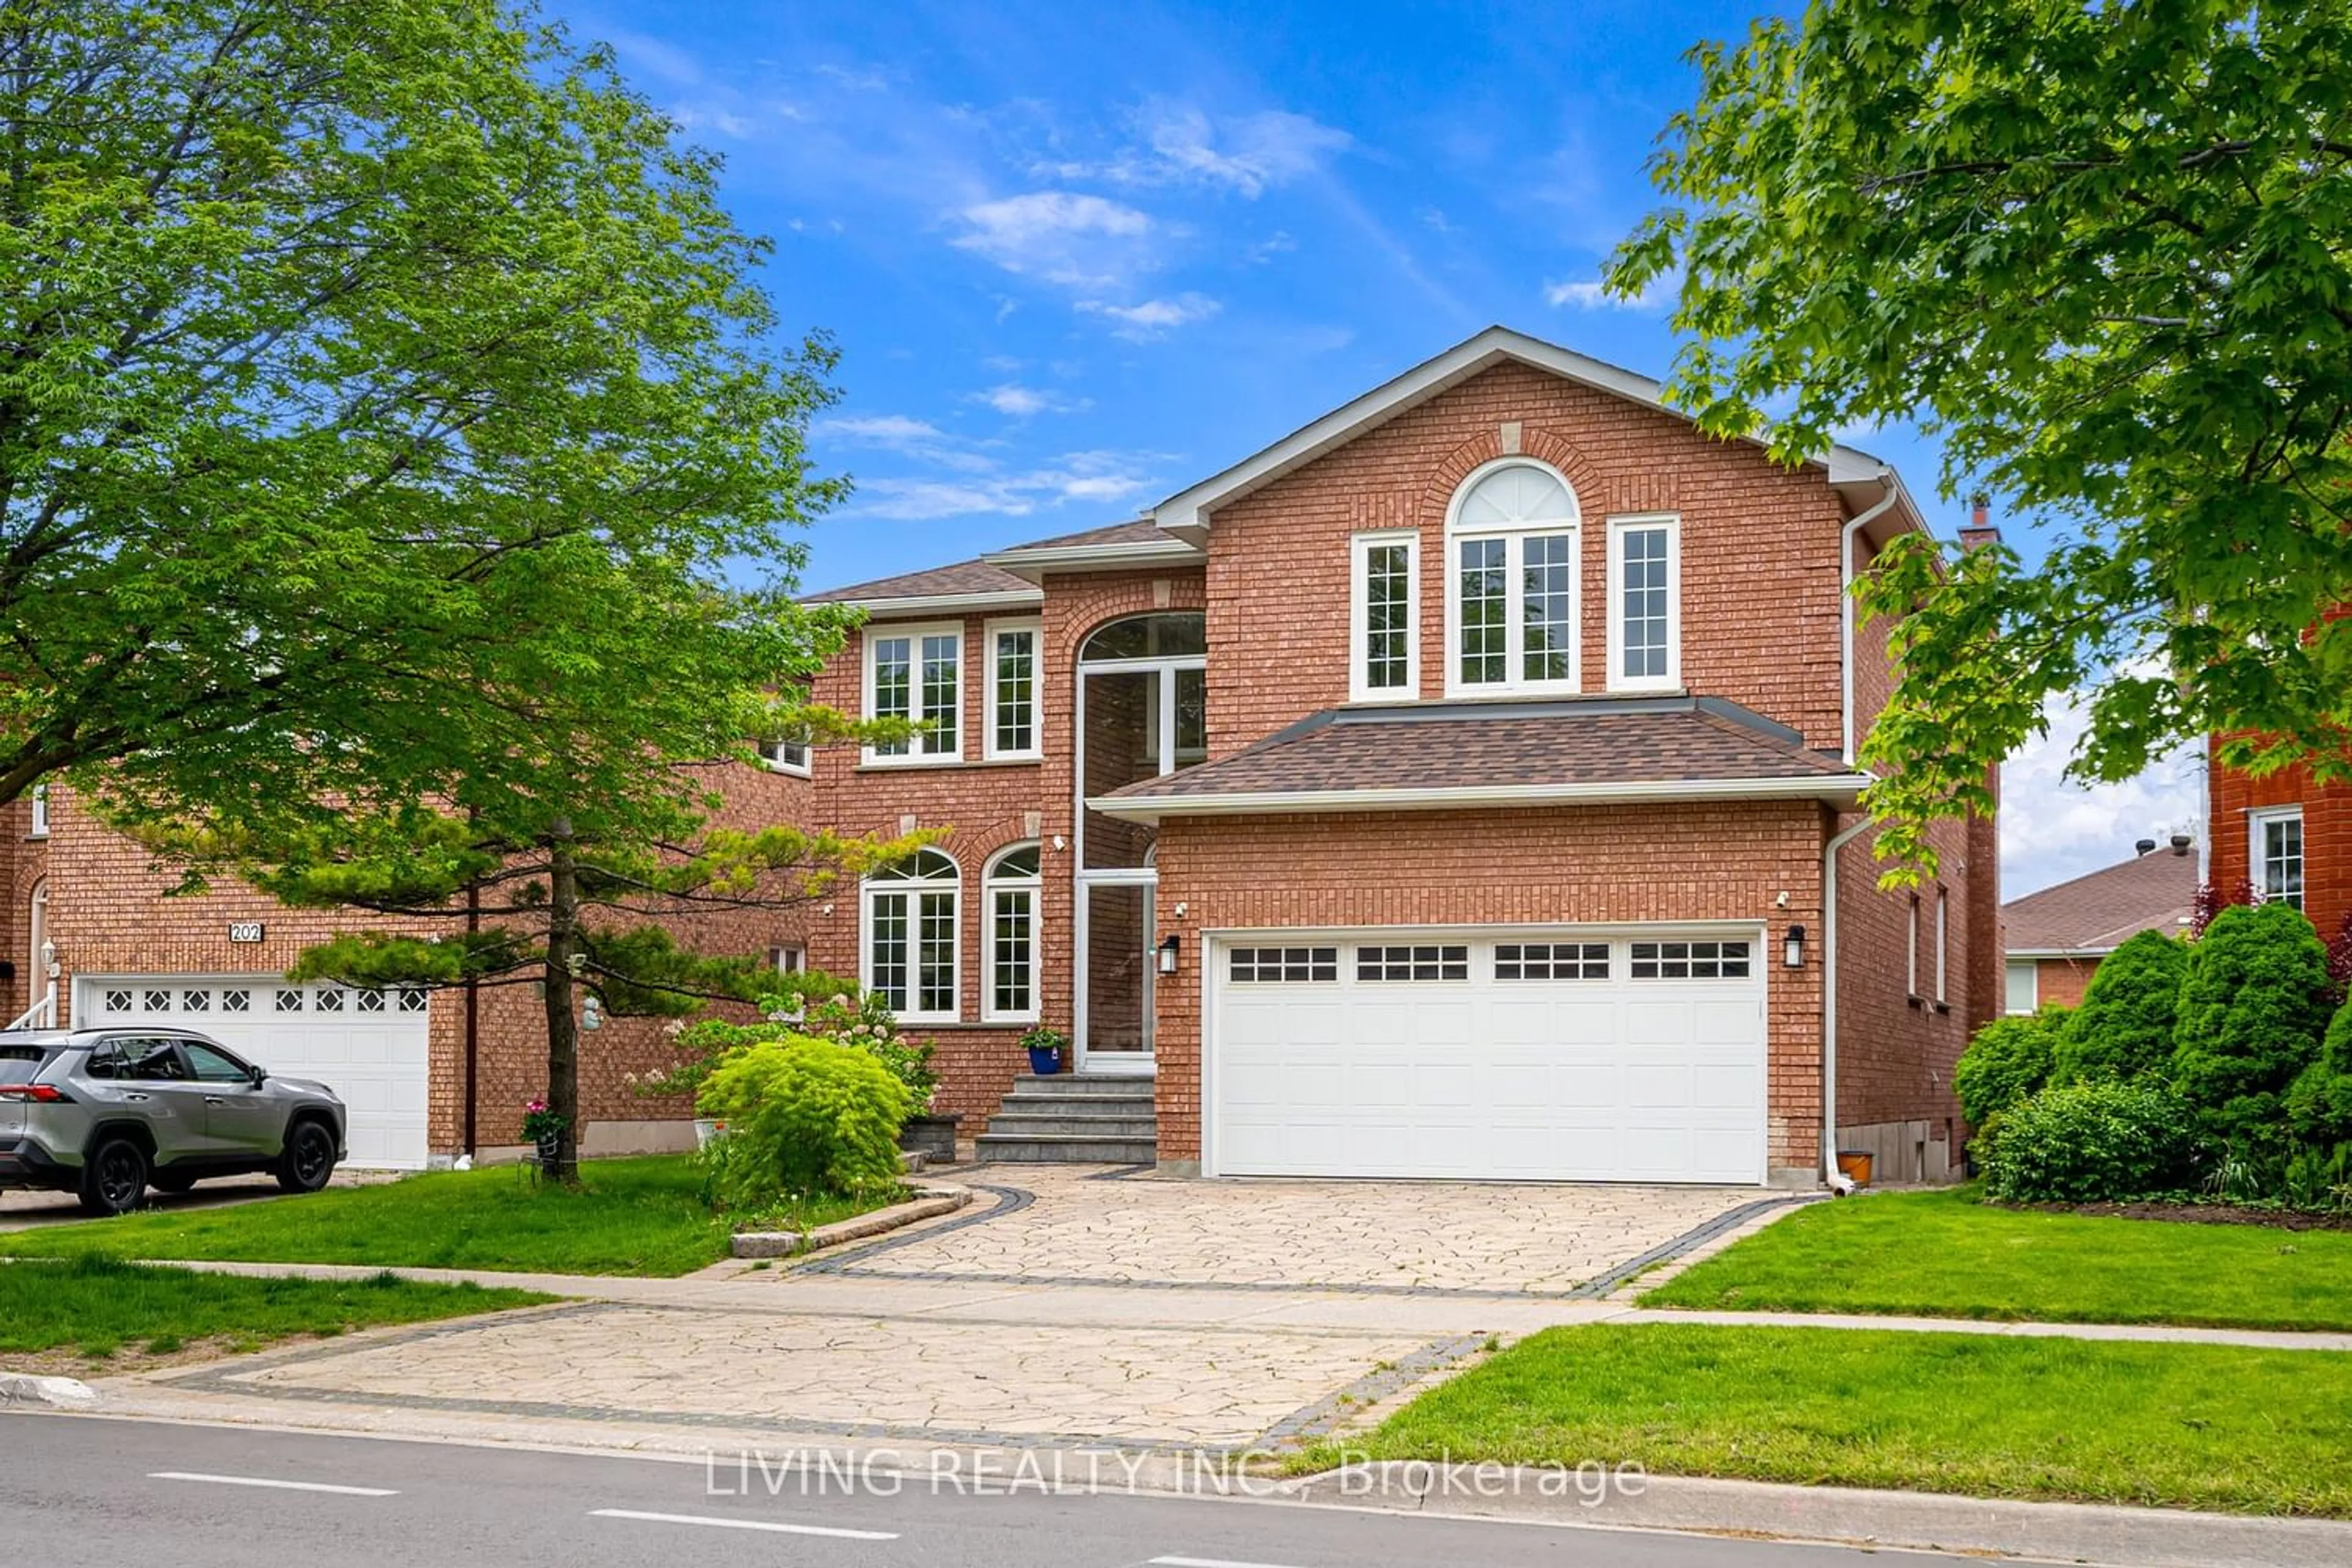 Home with brick exterior material for 204 Valleymede Dr, Richmond Hill Ontario L4B 3S4